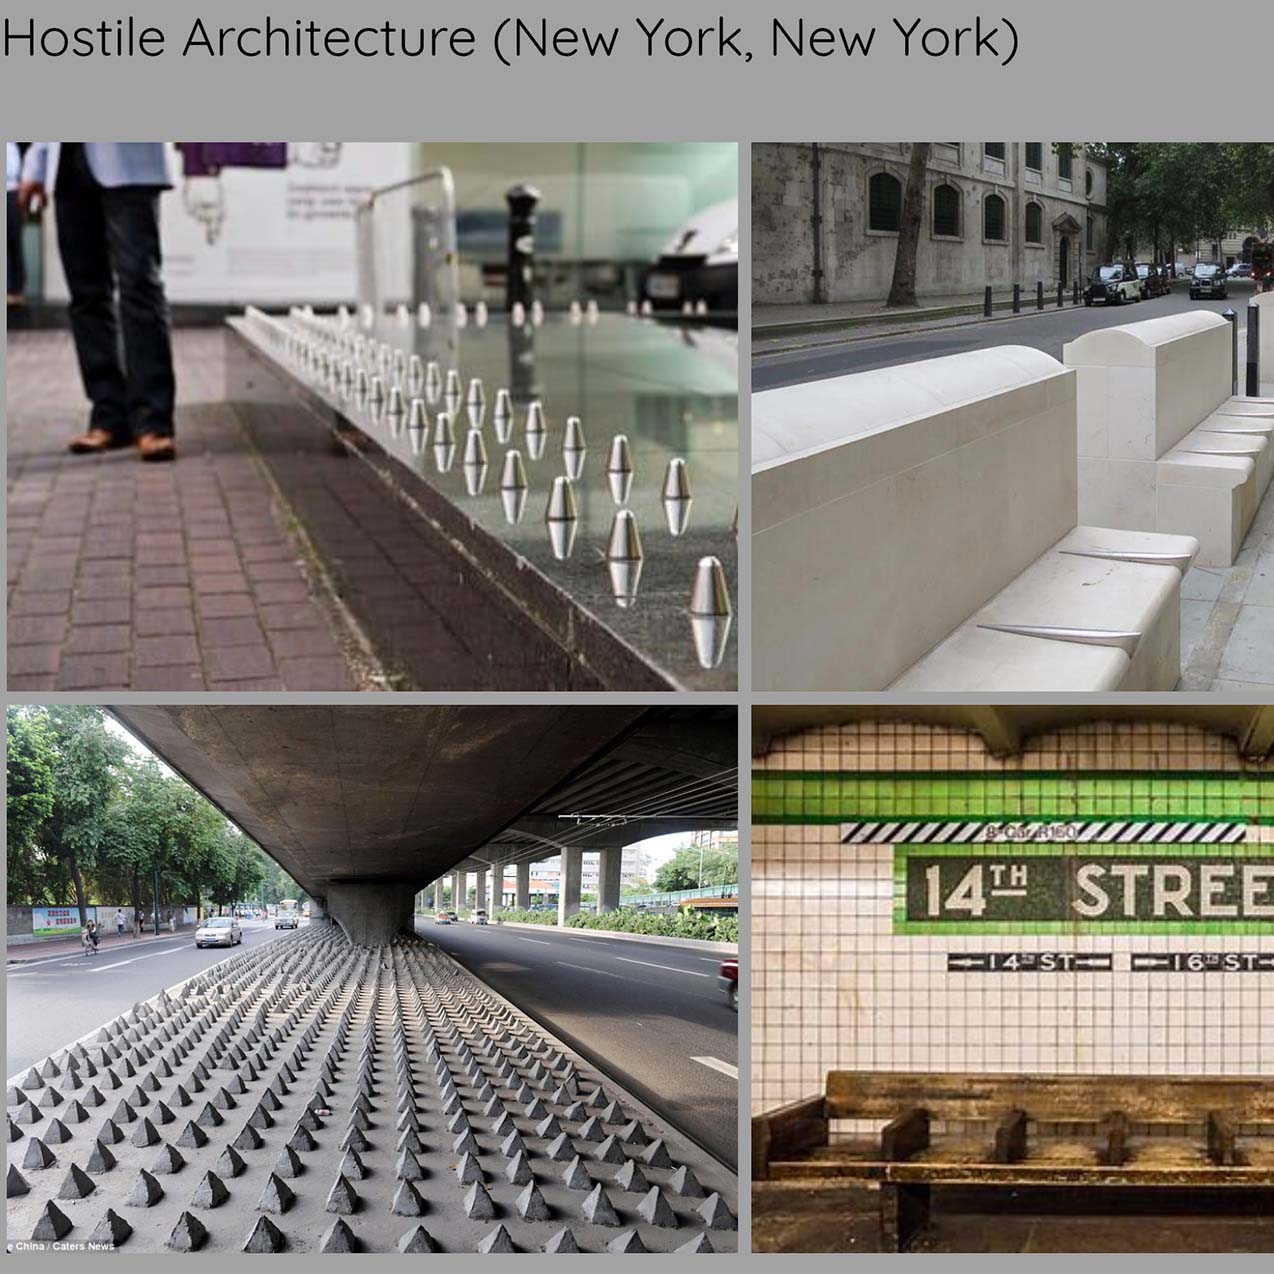 Visual example of how Dakota Emerson presented this coursework in ePortfolio: Shows photos of Hostile Architecture in New York City